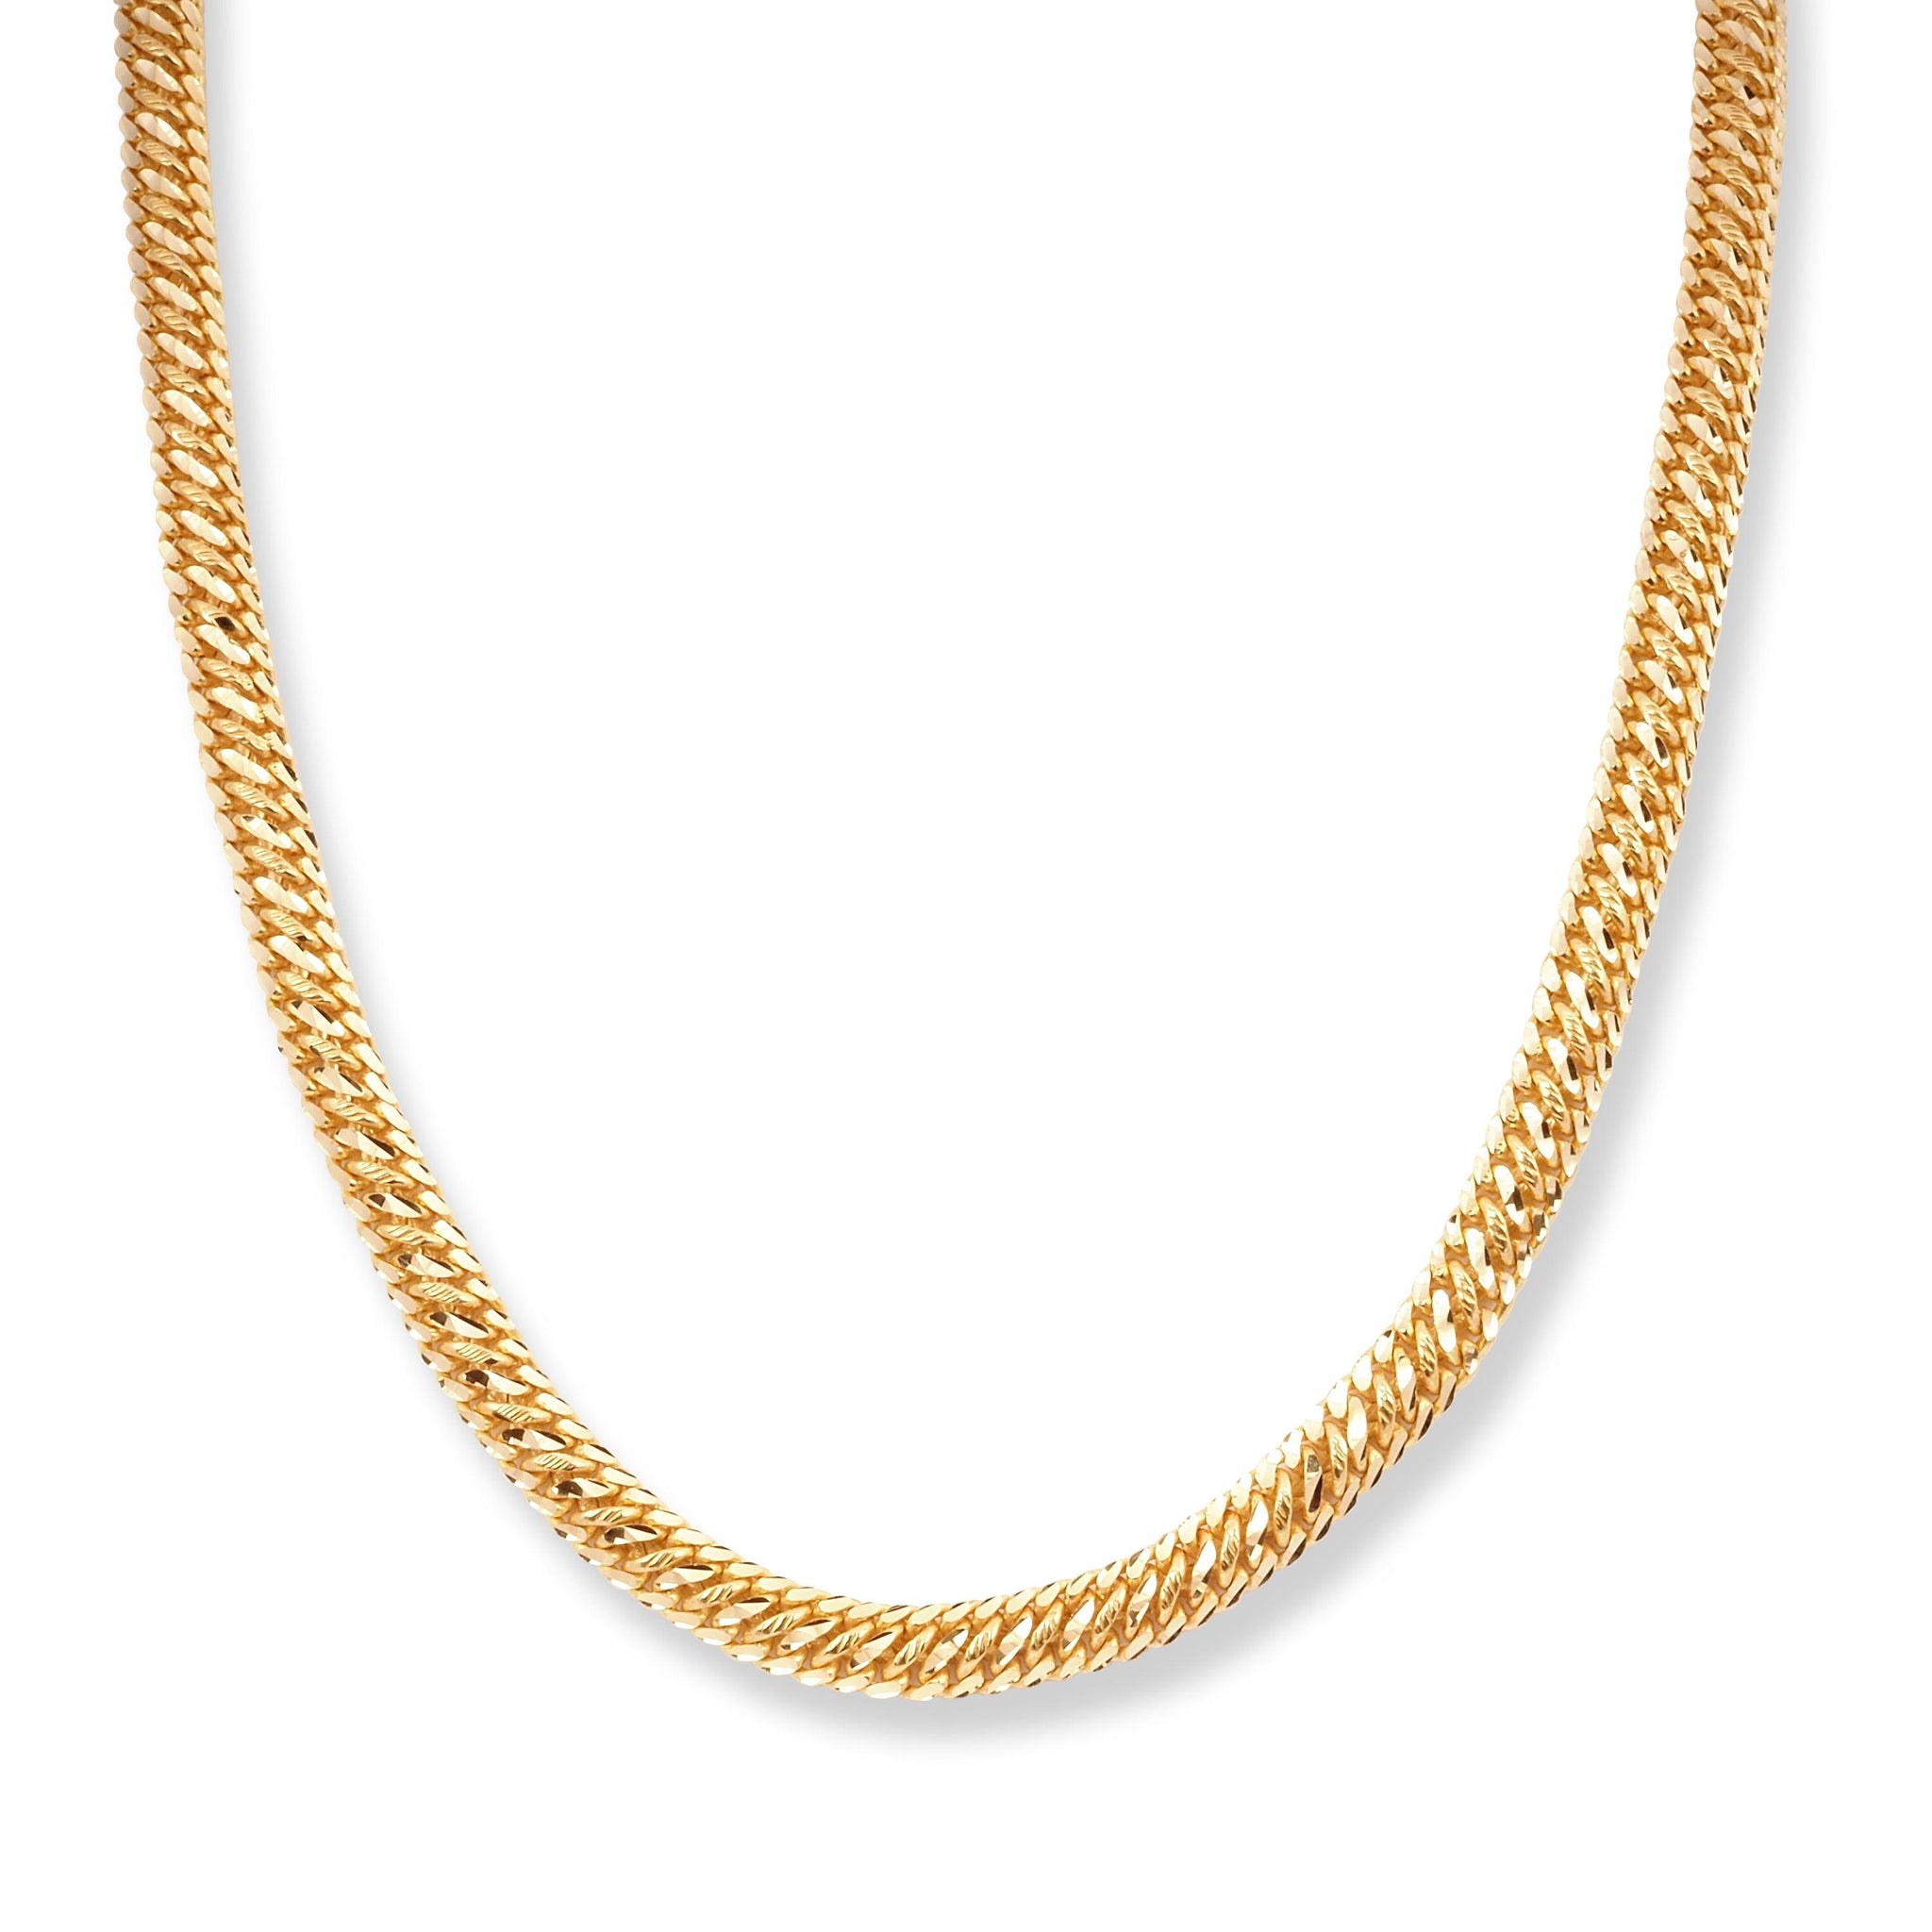 22ct Yellow Gold Intertwine Gents Chain with S Clasp C-3817